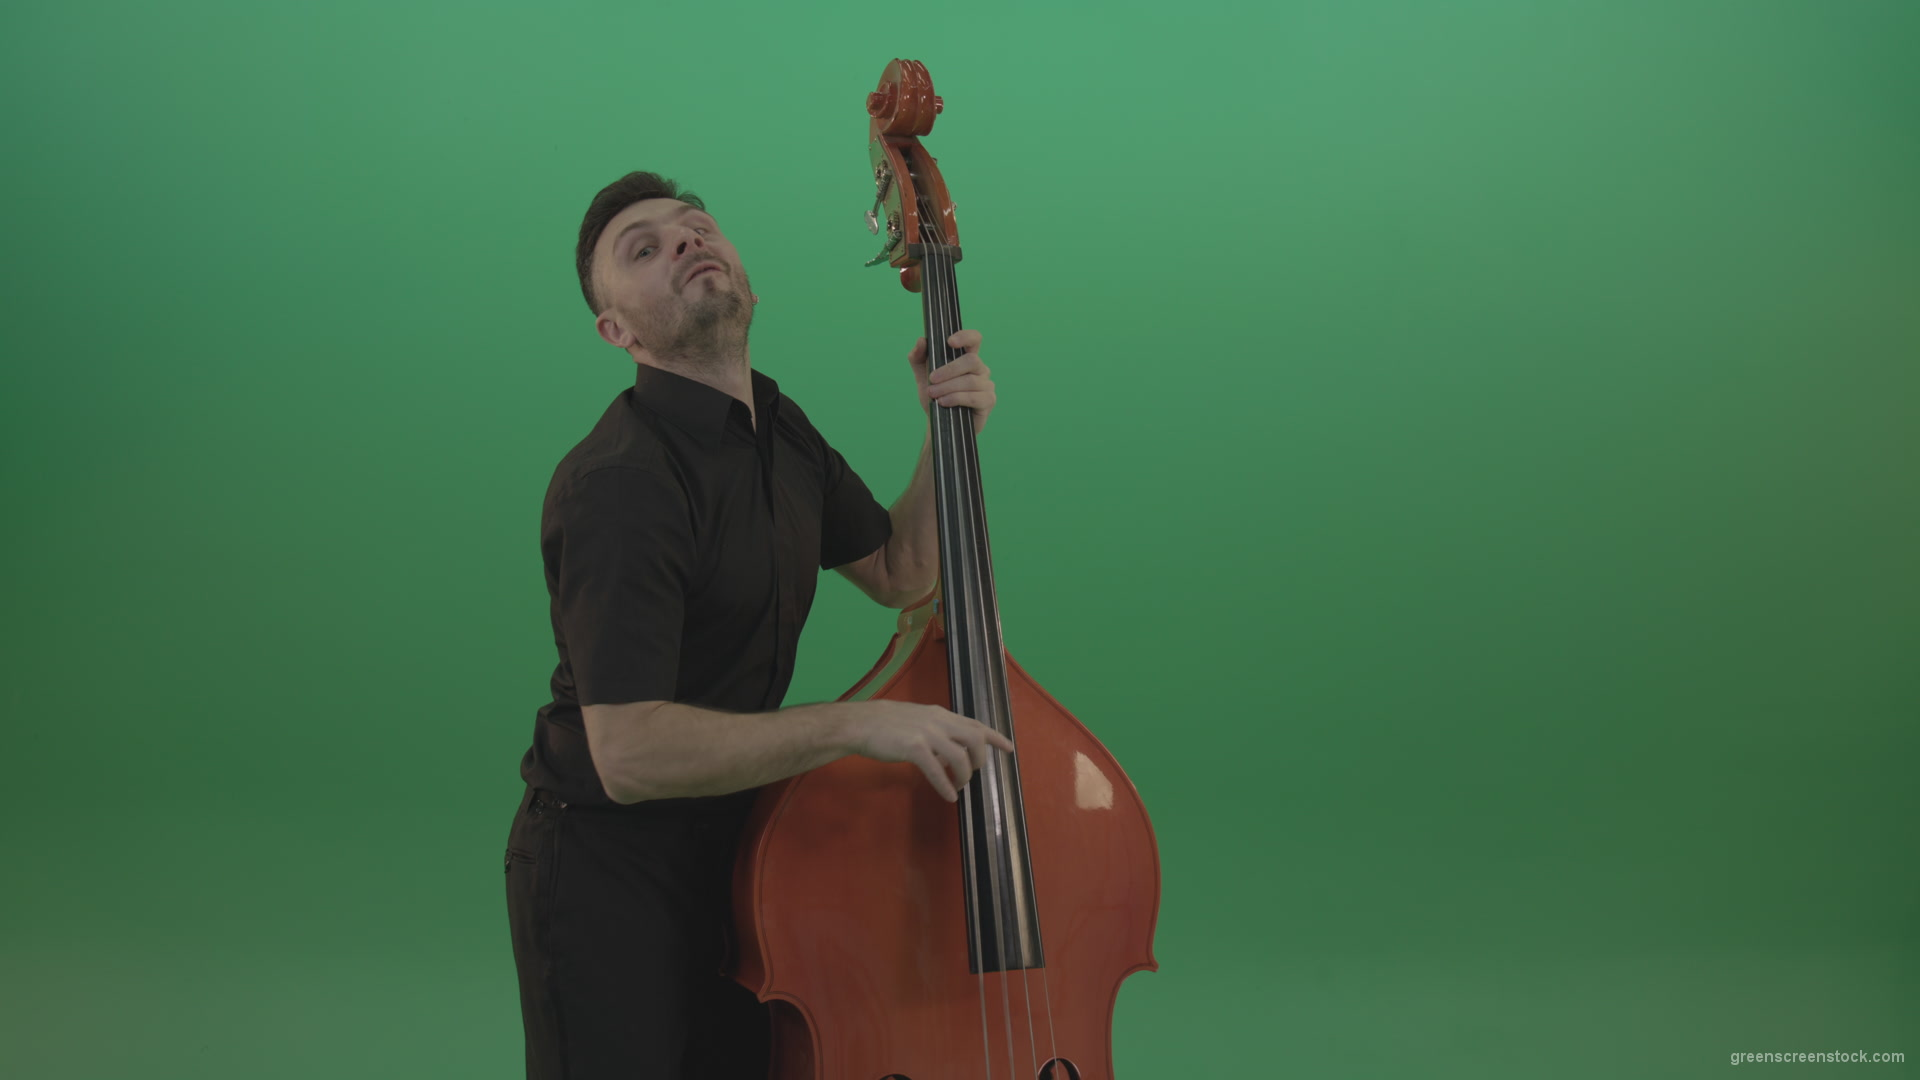 Funny-happy-man-with-smile-playing-jazz-on-double-bass-String-music-instrument-isolated-on-green-screen_008 Green Screen Stock